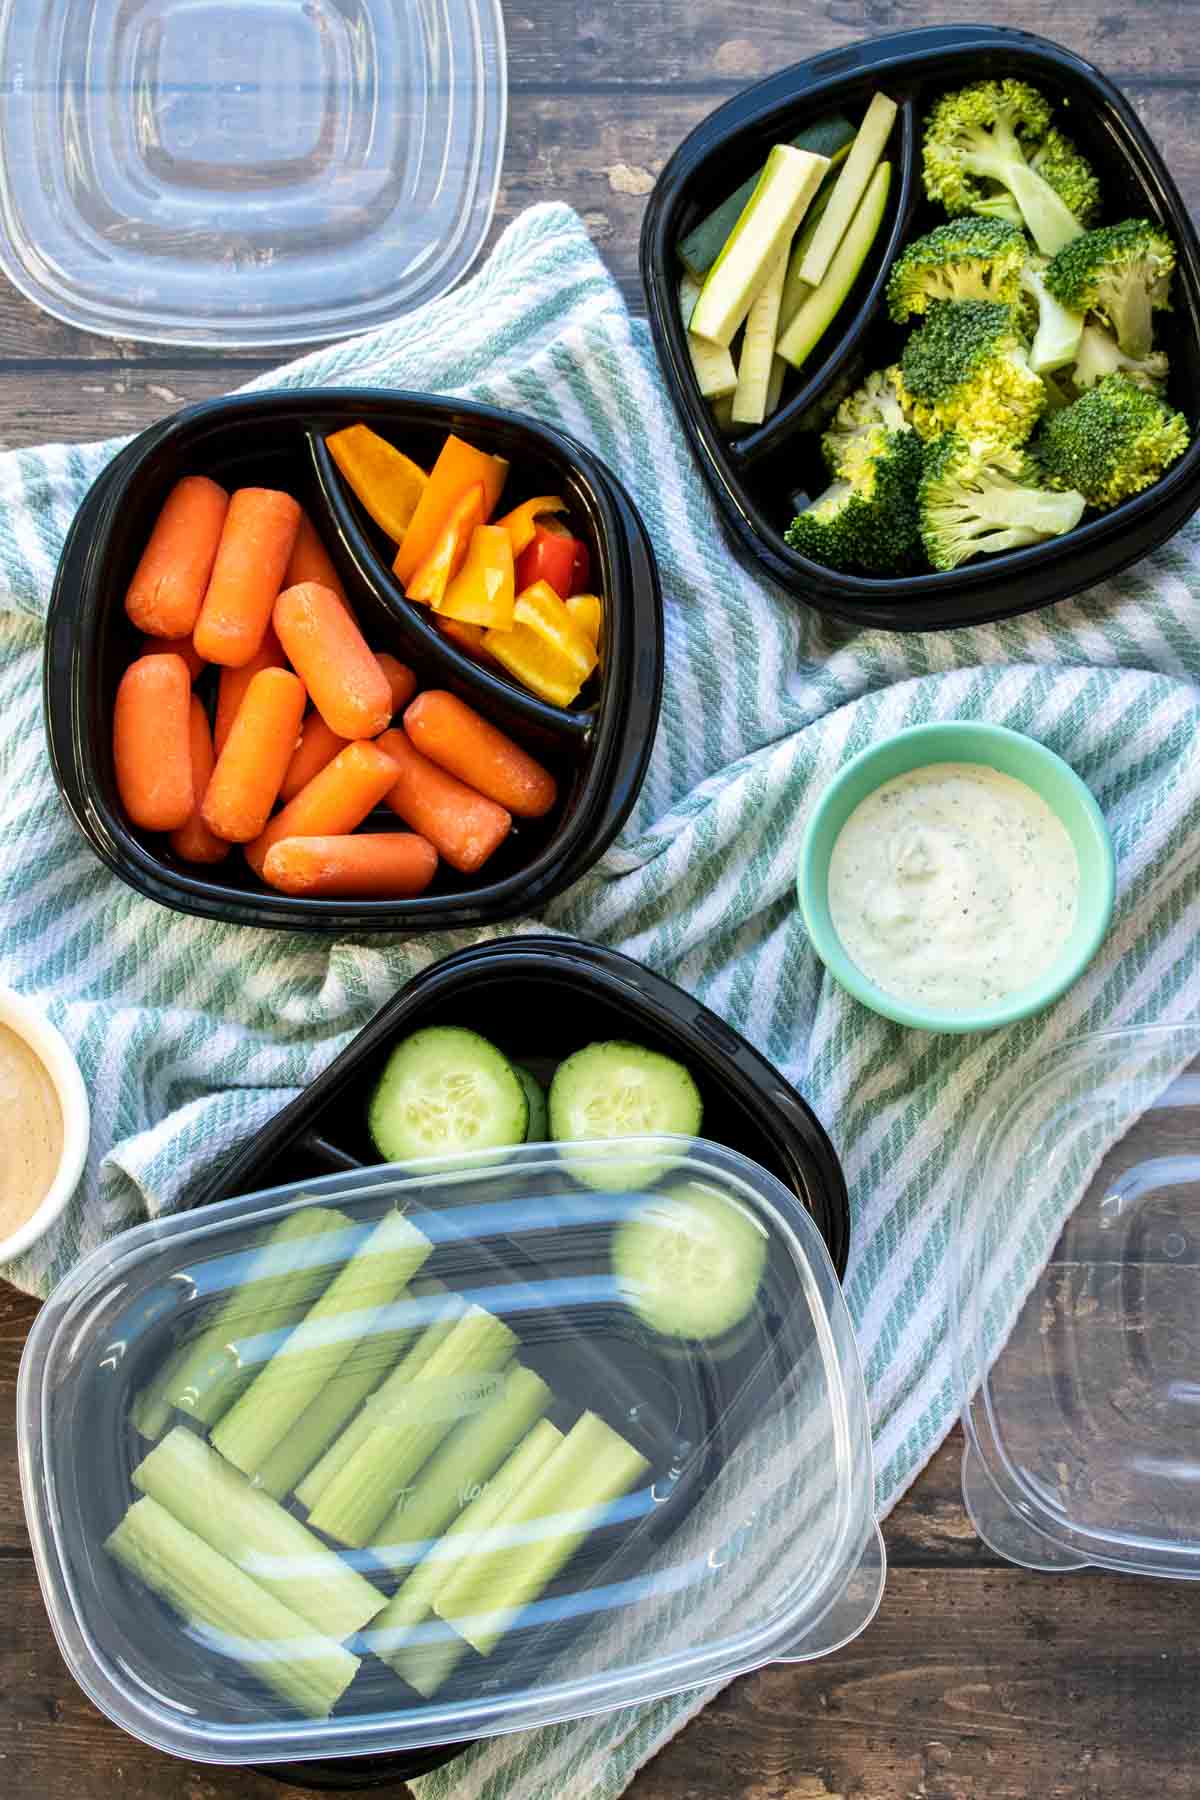 Fresh veggies in sectioned off black containers next to bowls of dips on a striped towel.